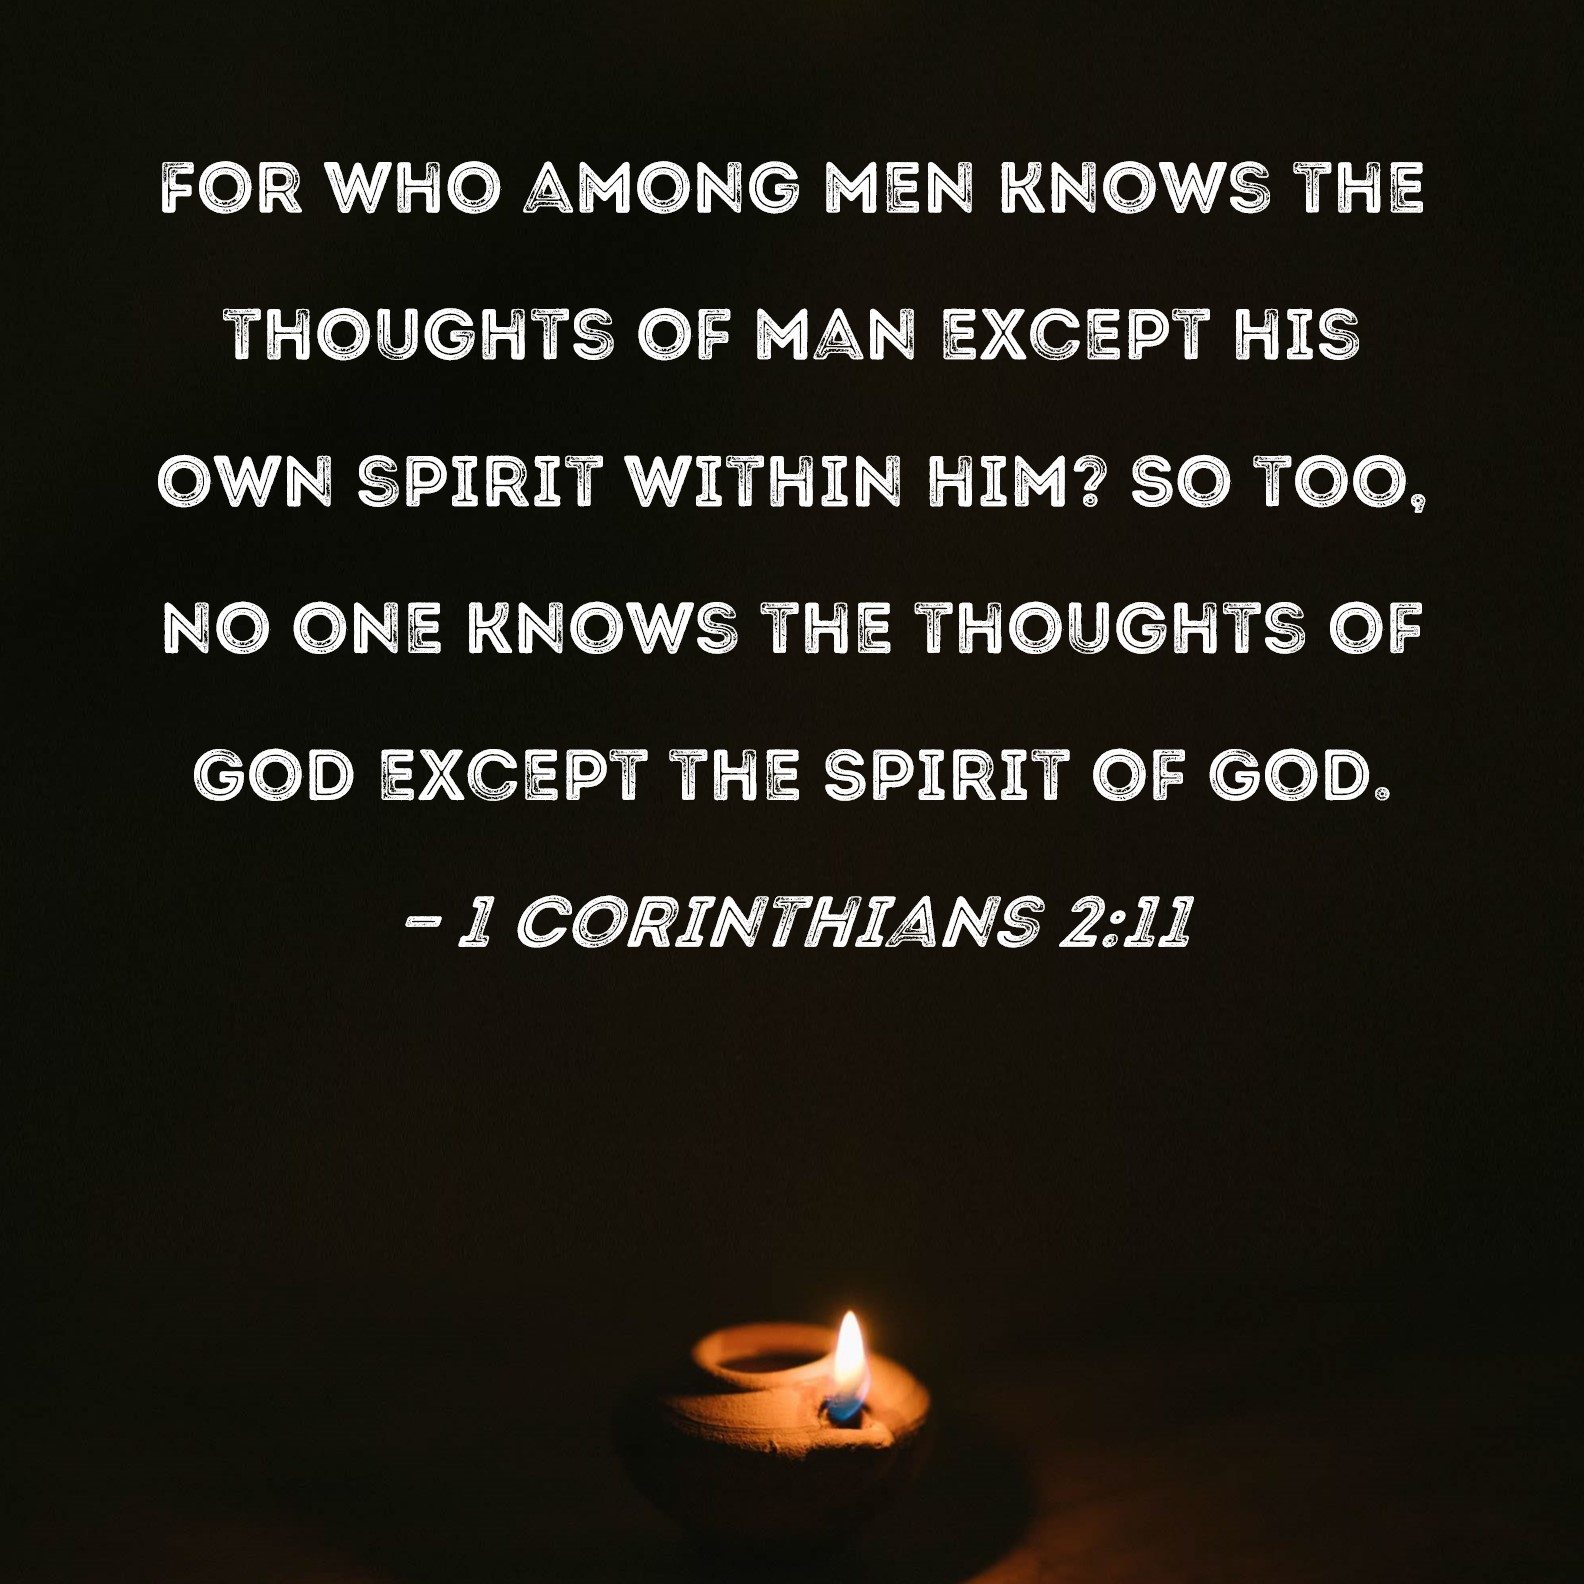 1 Corinthians 211 For who among men knows the thoughts of man except